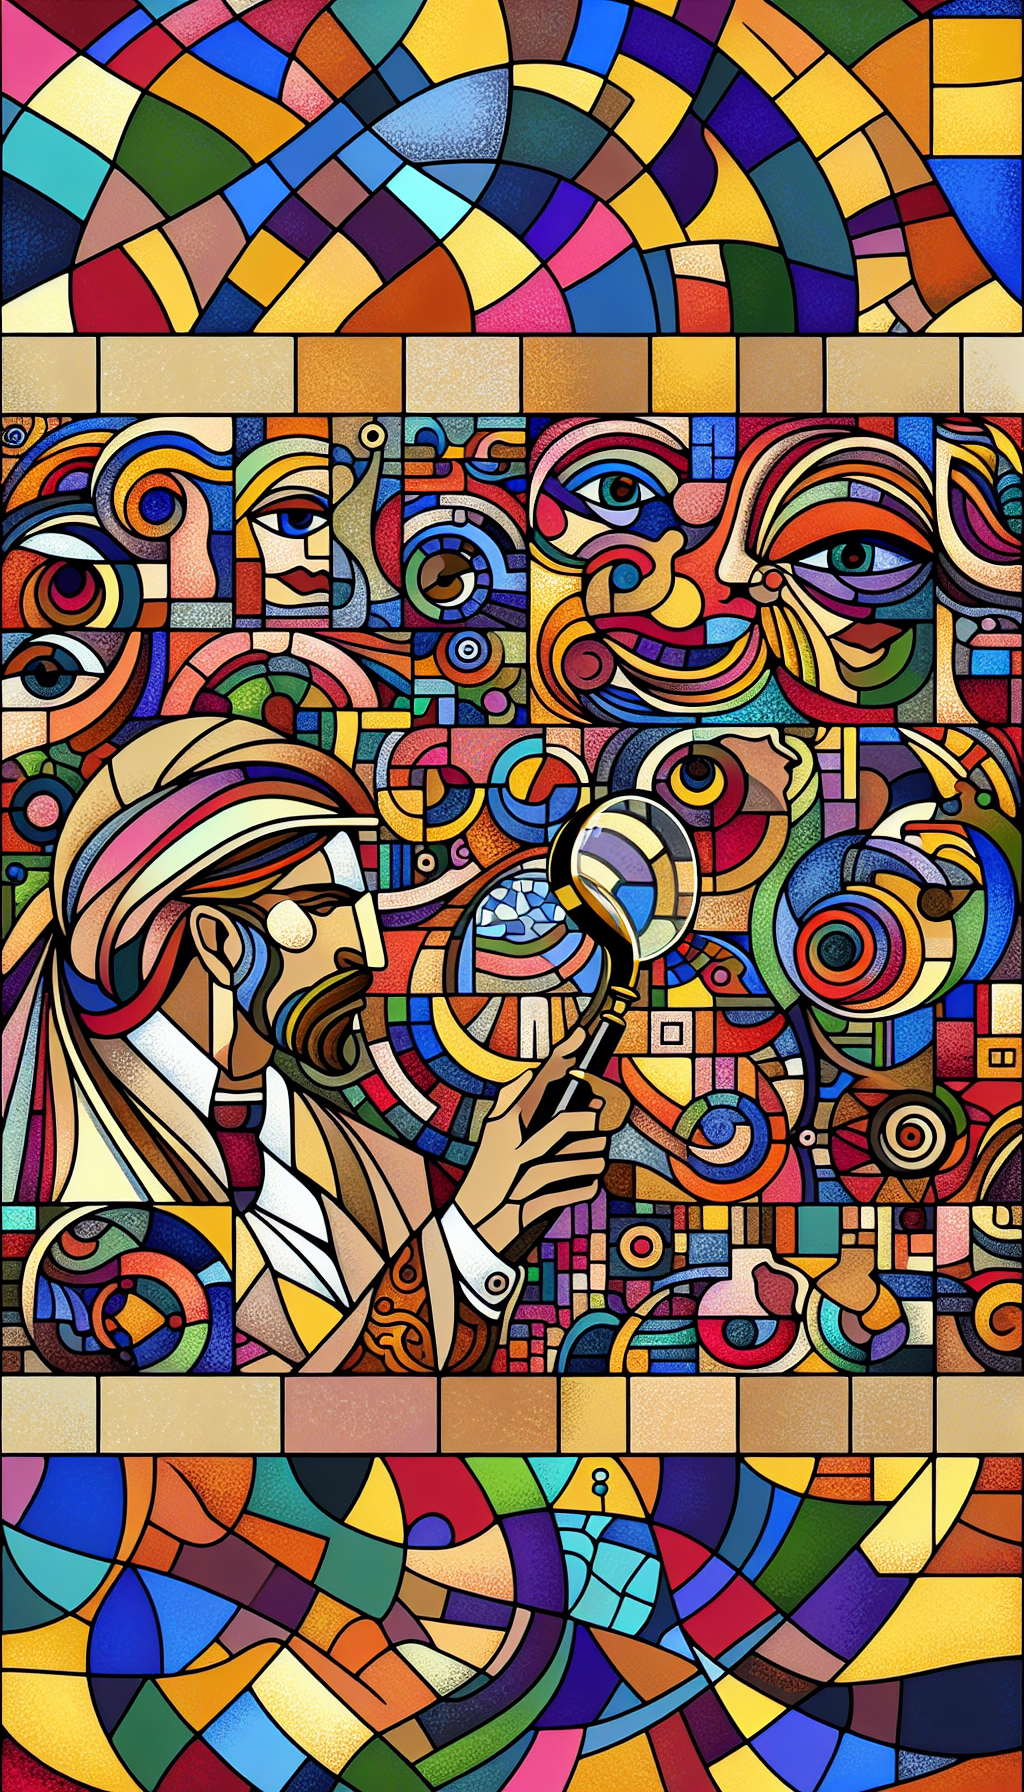 An illustration with a mosaic of diverse, stylized faces in the distinct, vibrant lines of Charles Bibbs' art, each fragment showcasing different cultural motifs merging into a singular tapestry, centering around a prominent, elegant figure observing the melange appreciatively. This central figure holds a magnifying glass, emphasizing intricate details within the artwork, symbolizing the deepening of cultural value through Bibbs' thematic expression.